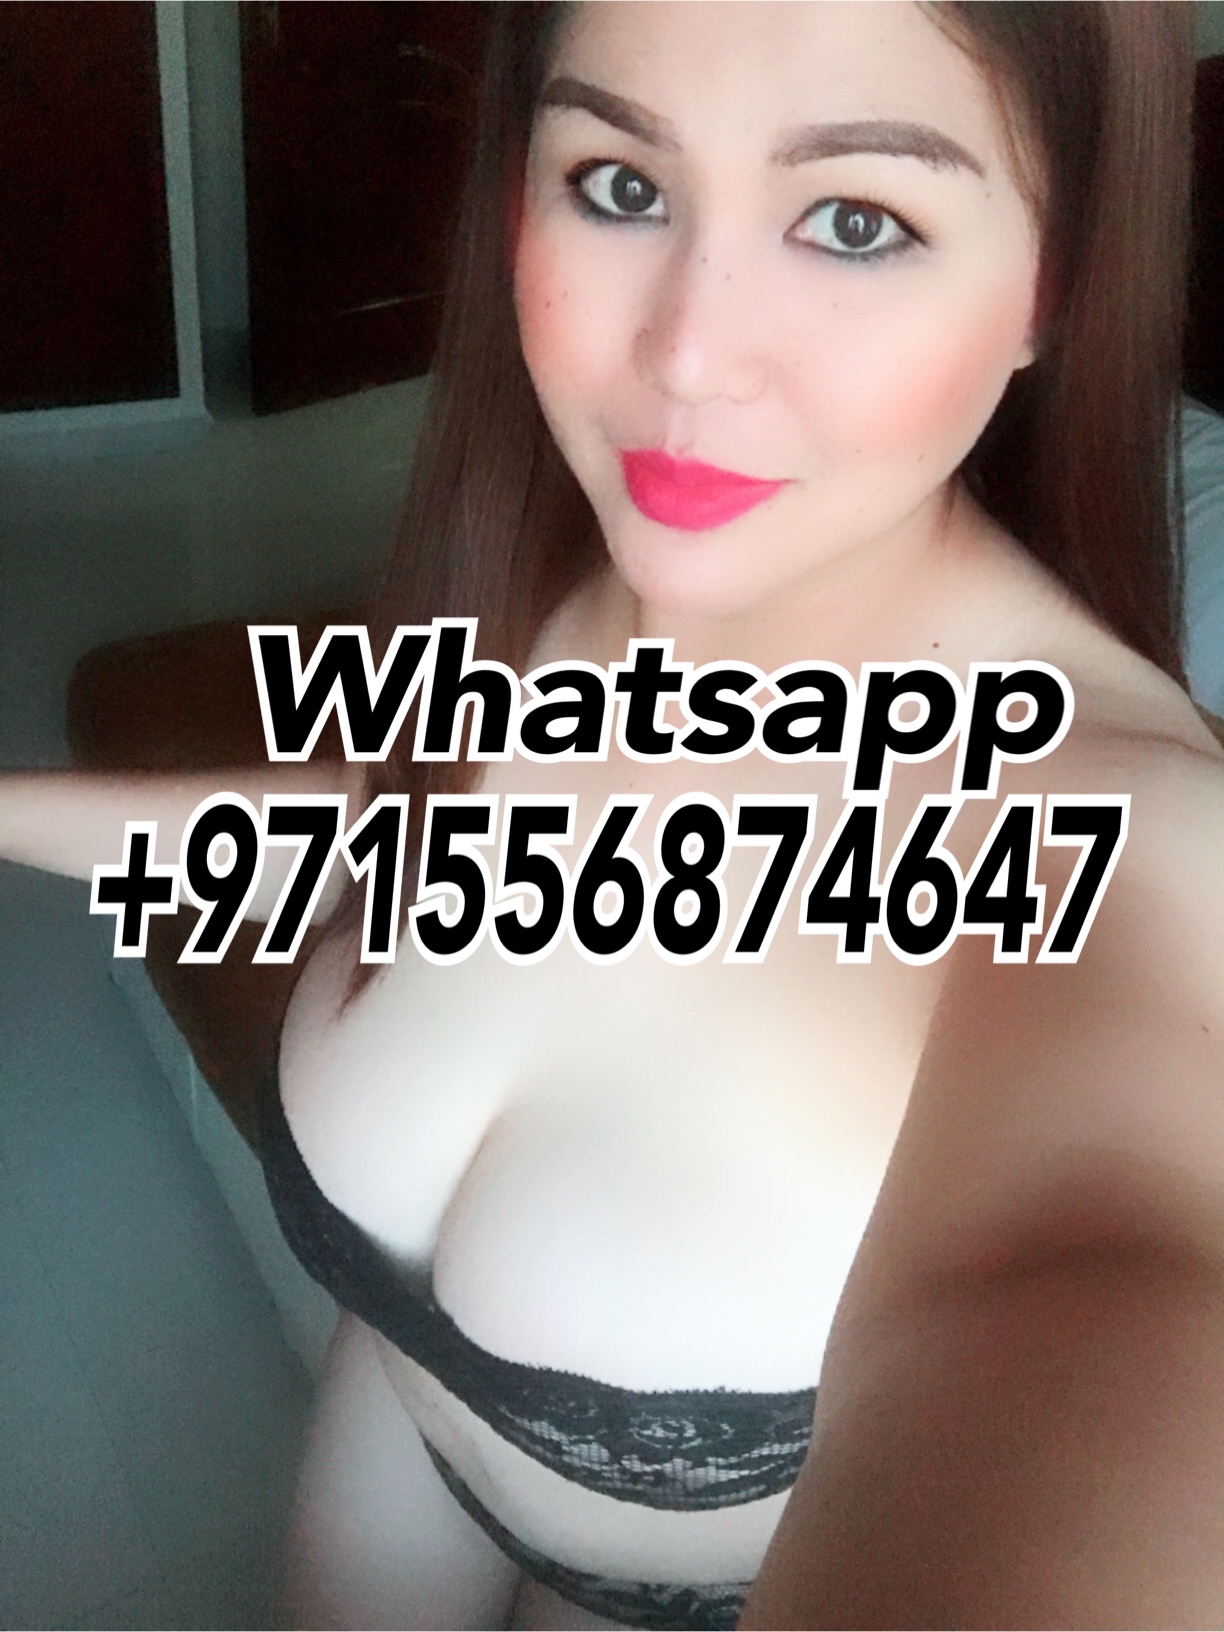 Cheap Rate And Outcall Indian Female Escorts in Abu Dhabi